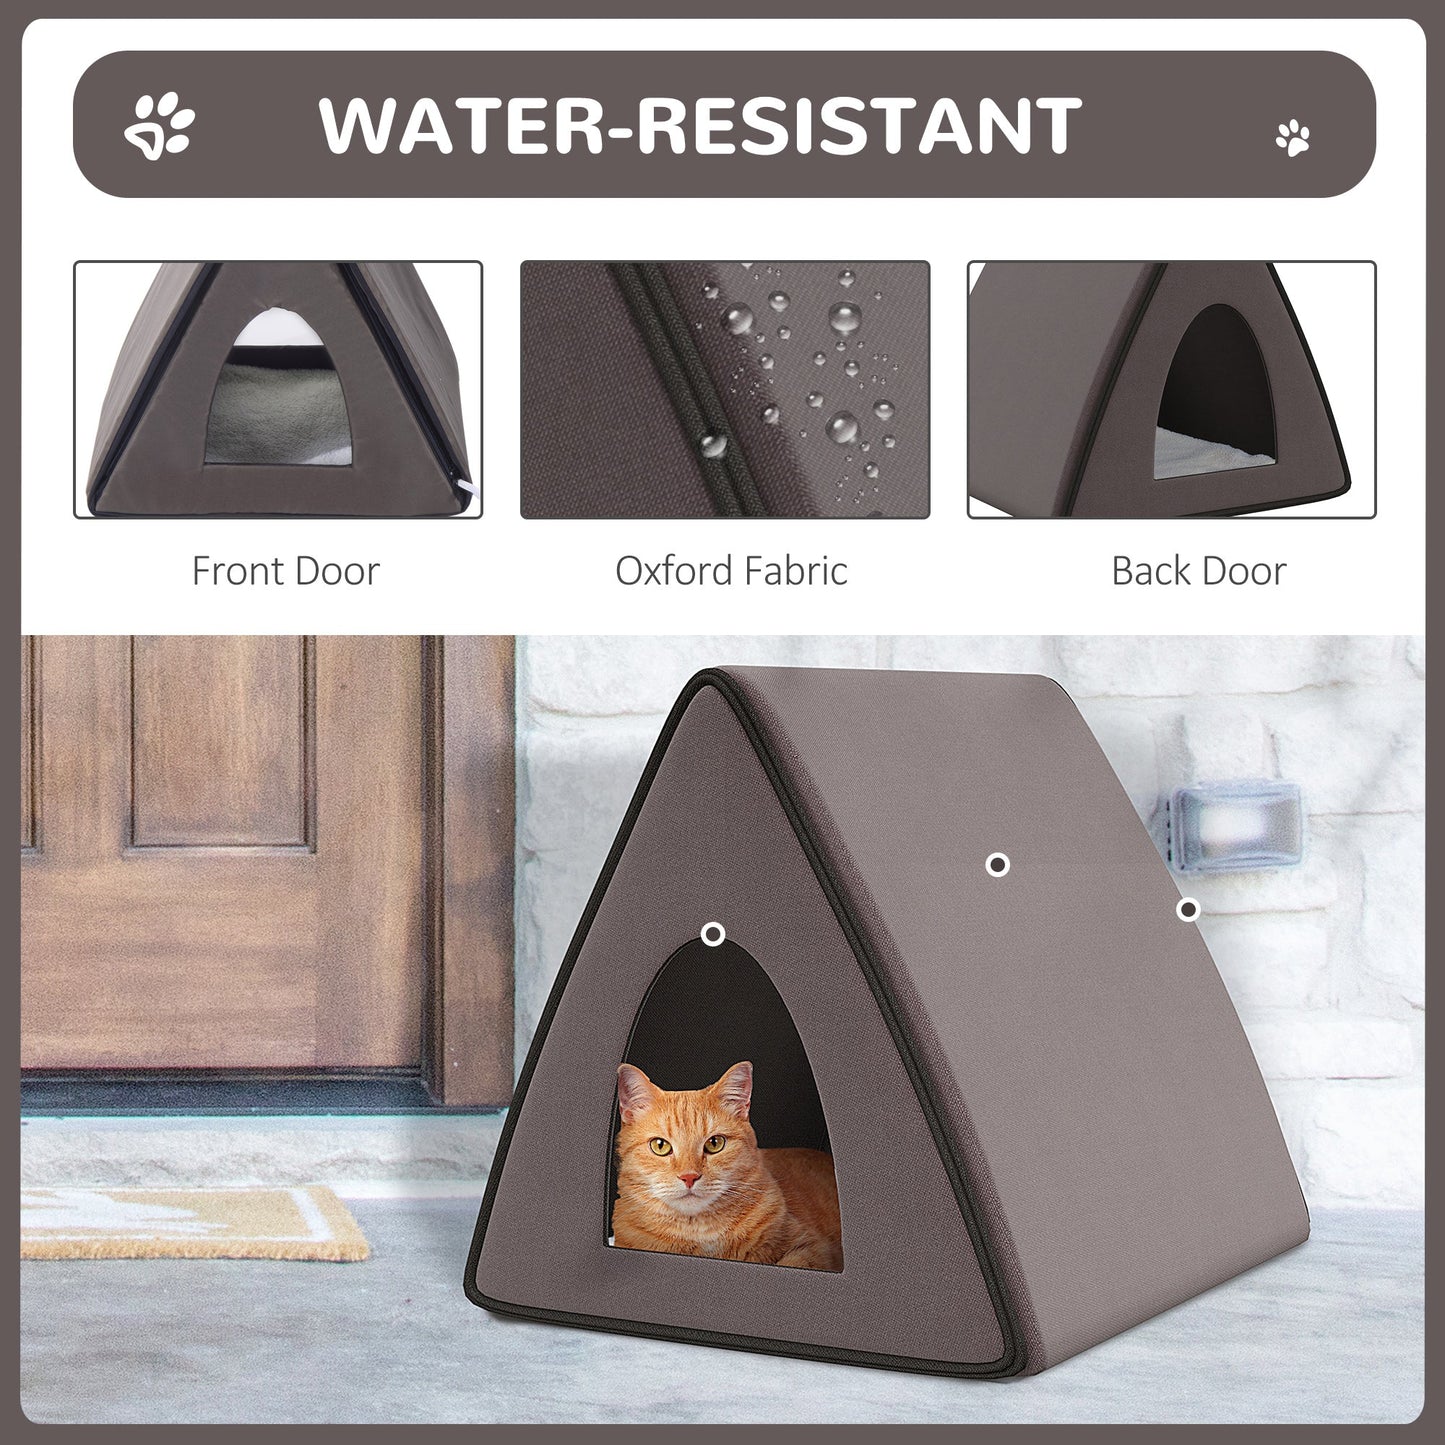 -PawHut Heated Cat Shelter House A-Frame Water-resistant Pet Bed Small Animal Playpen Crate with Zippered Roof - Outdoor Style Company